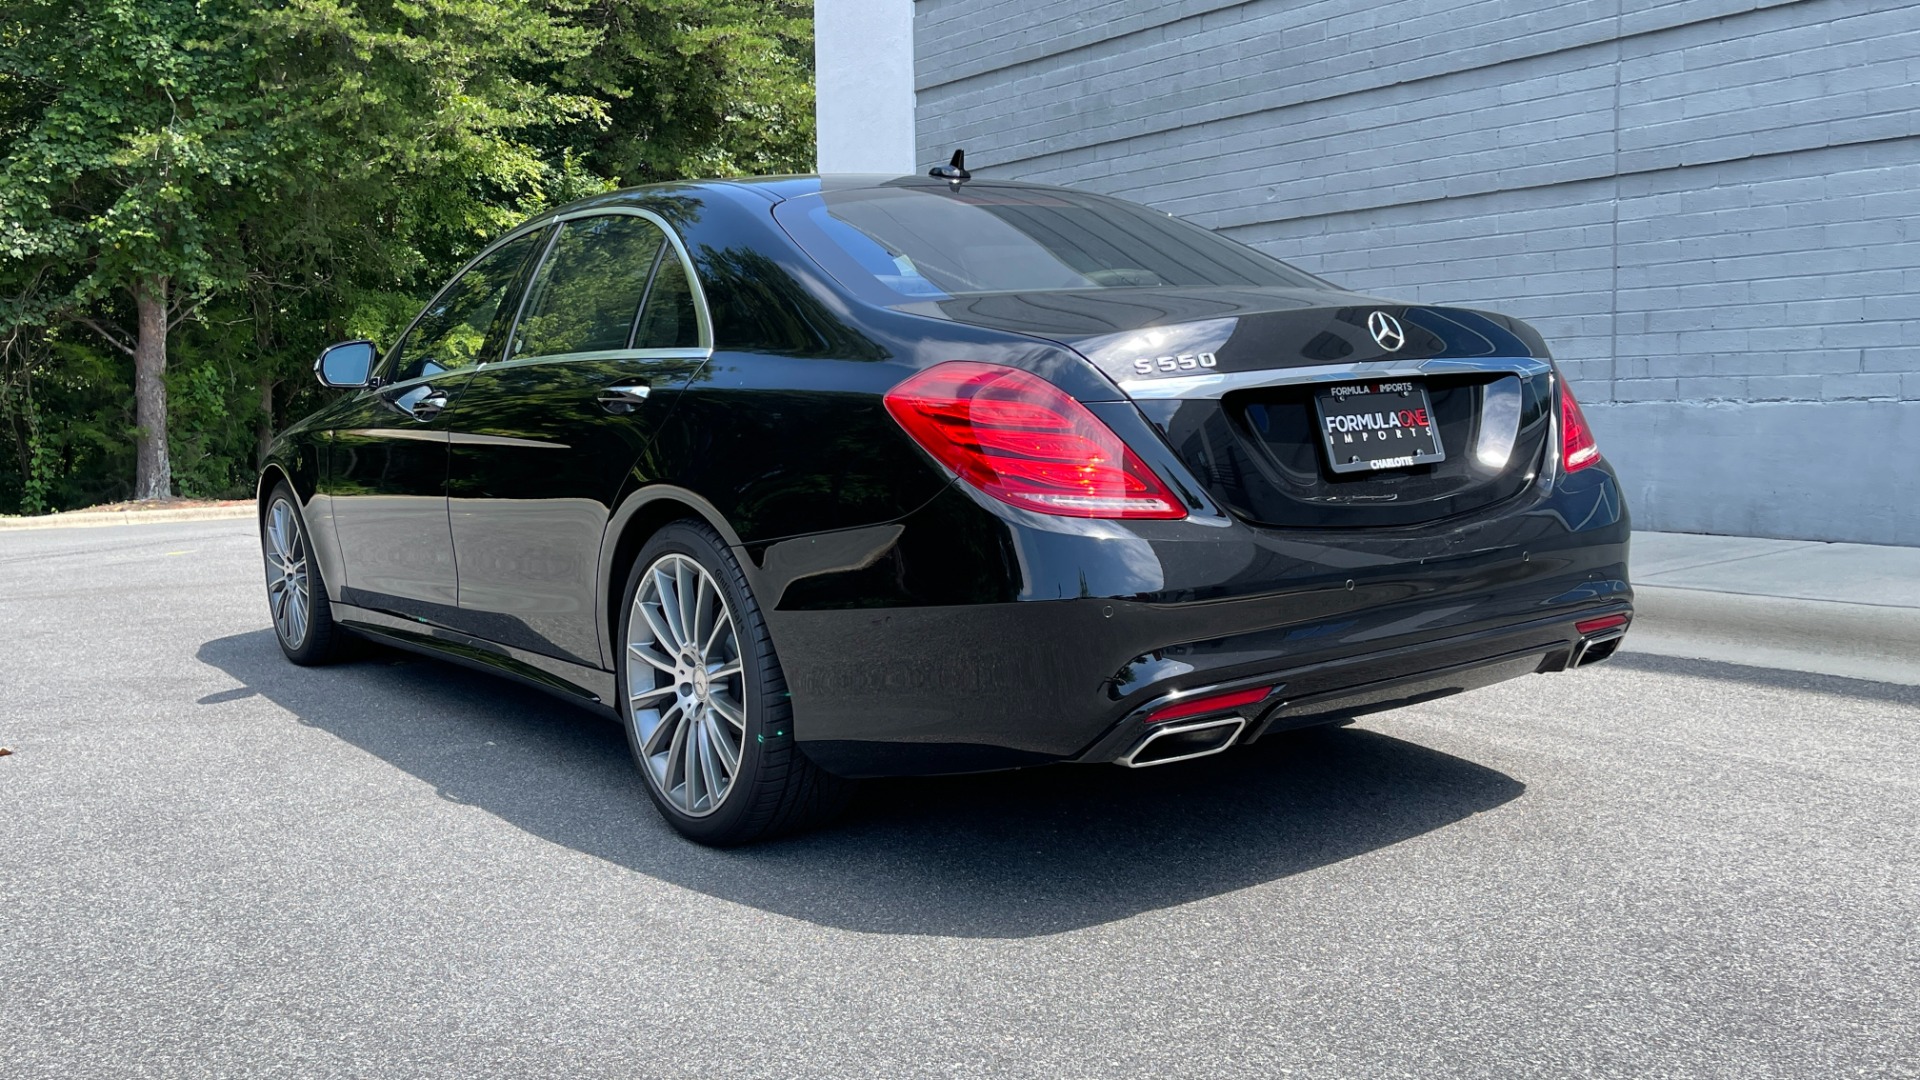 Used 2015 Mercedes-Benz S-Class S550 / 20IN AMG WHEELS / SPORT / COMFORT / PREMIUM / DRIVER ASSIST for sale $38,595 at Formula Imports in Charlotte NC 28227 3